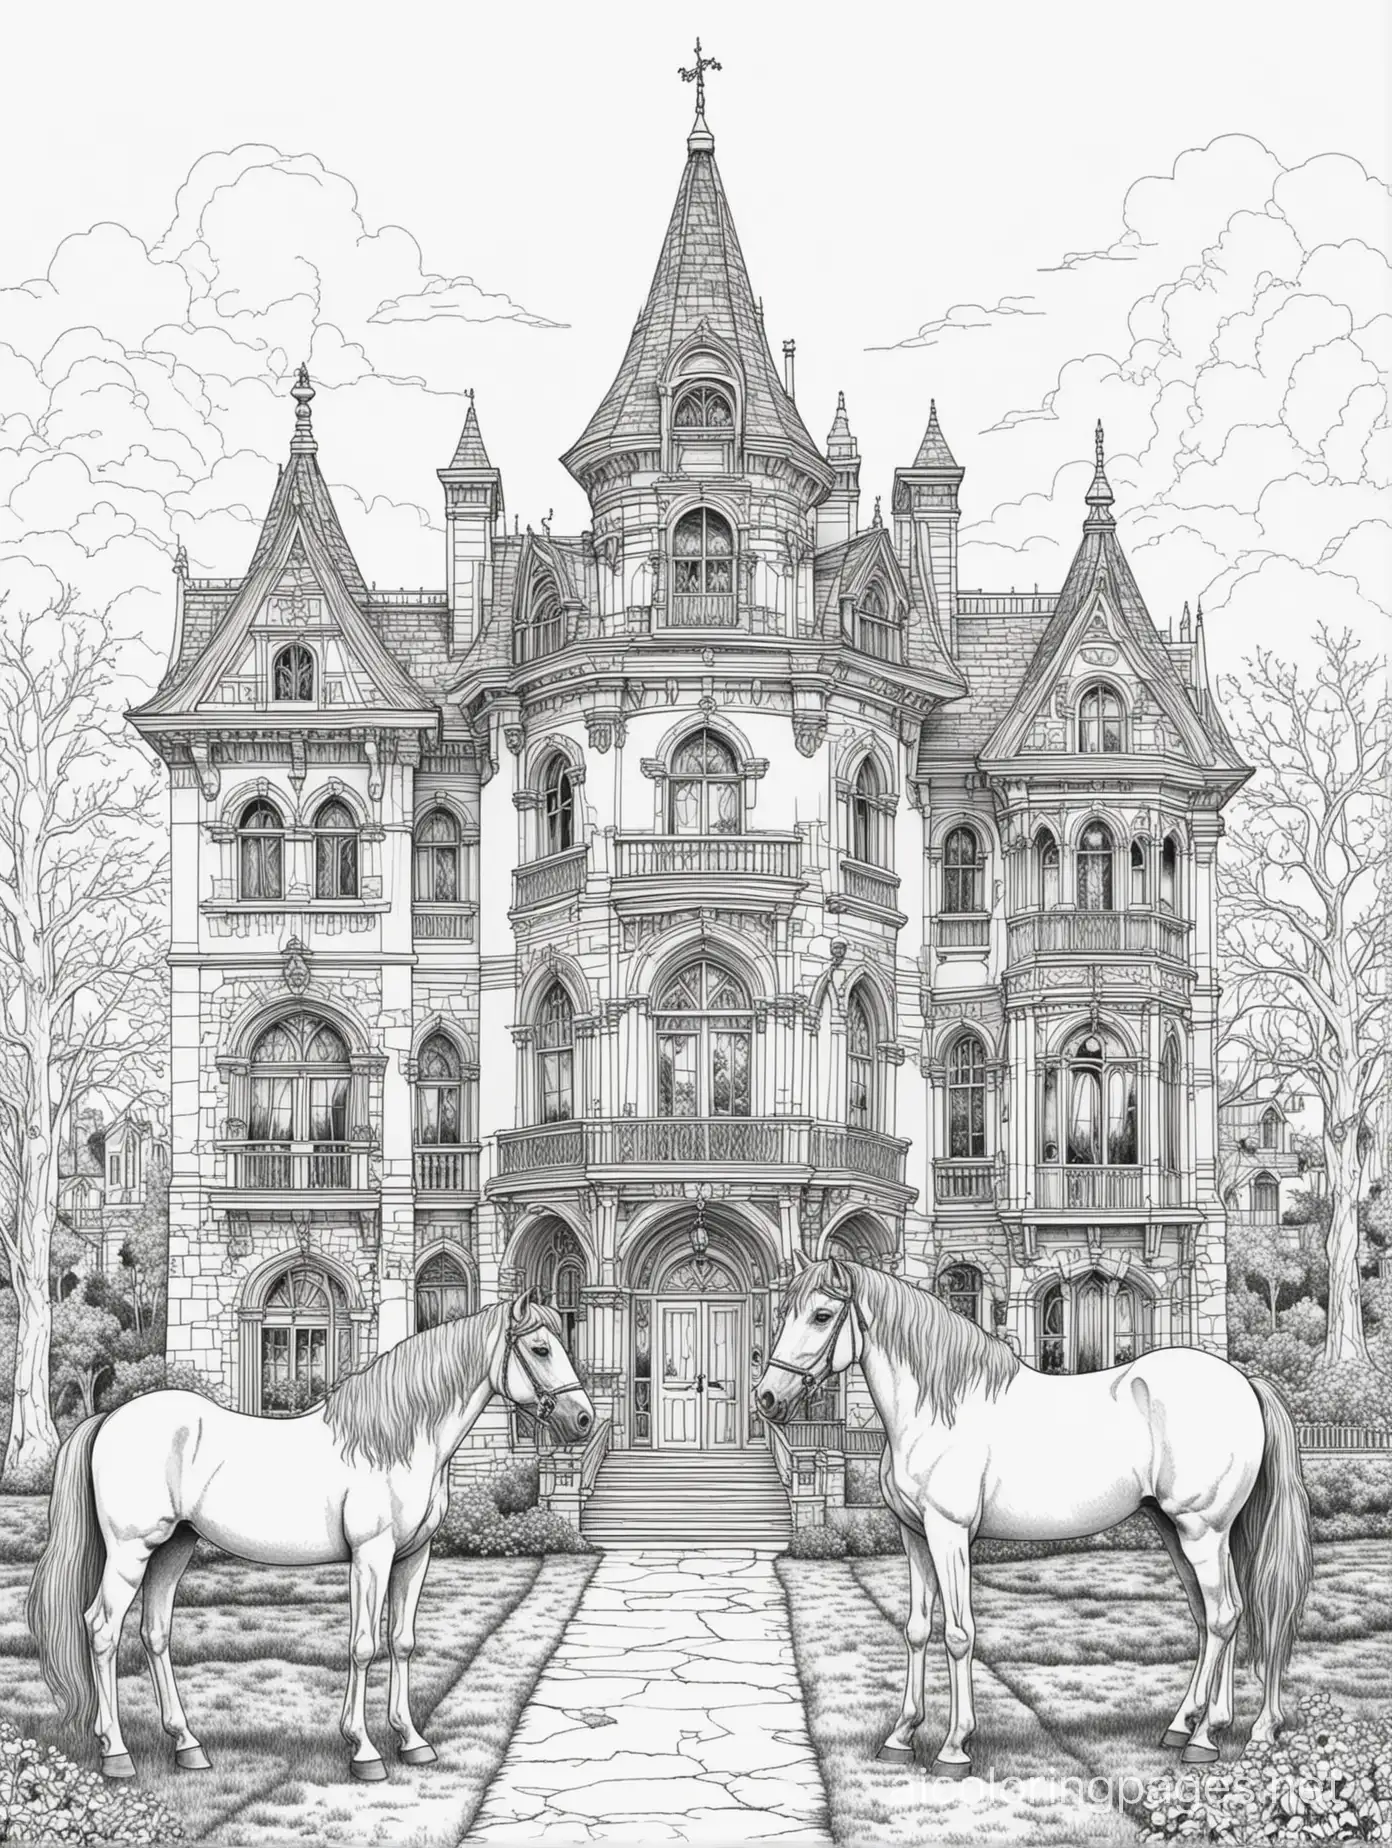 horses in front of a gothic victorian mansion, Coloring Page, black and white, line art, white background, Simplicity, Ample White Space. The background of the coloring page is plain white to make it easy for young children to color within the lines. The outlines of all the subjects are easy to distinguish, making it simple for kids to color without too much difficulty